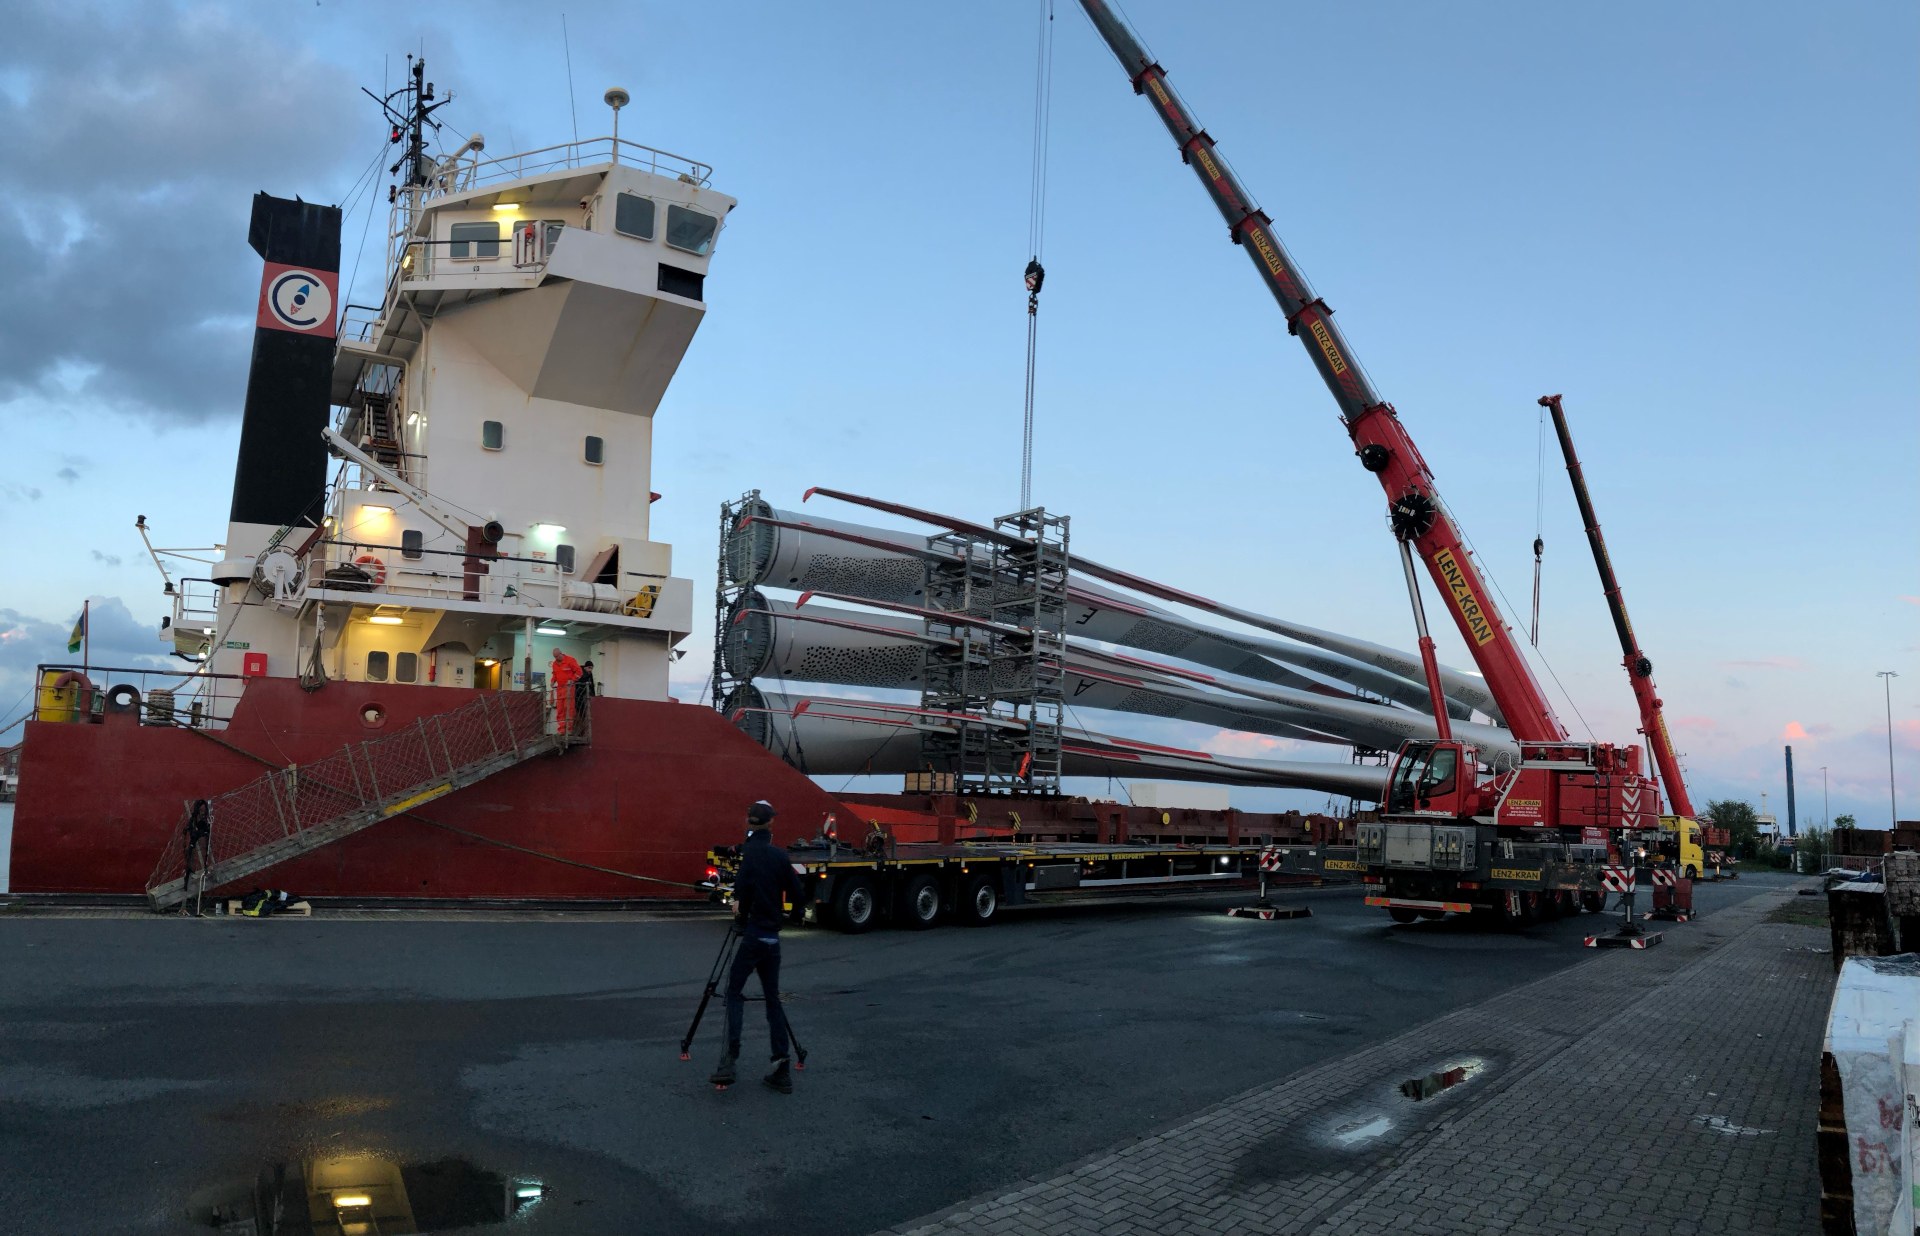 The rotor blades arriving in Bremerhaven